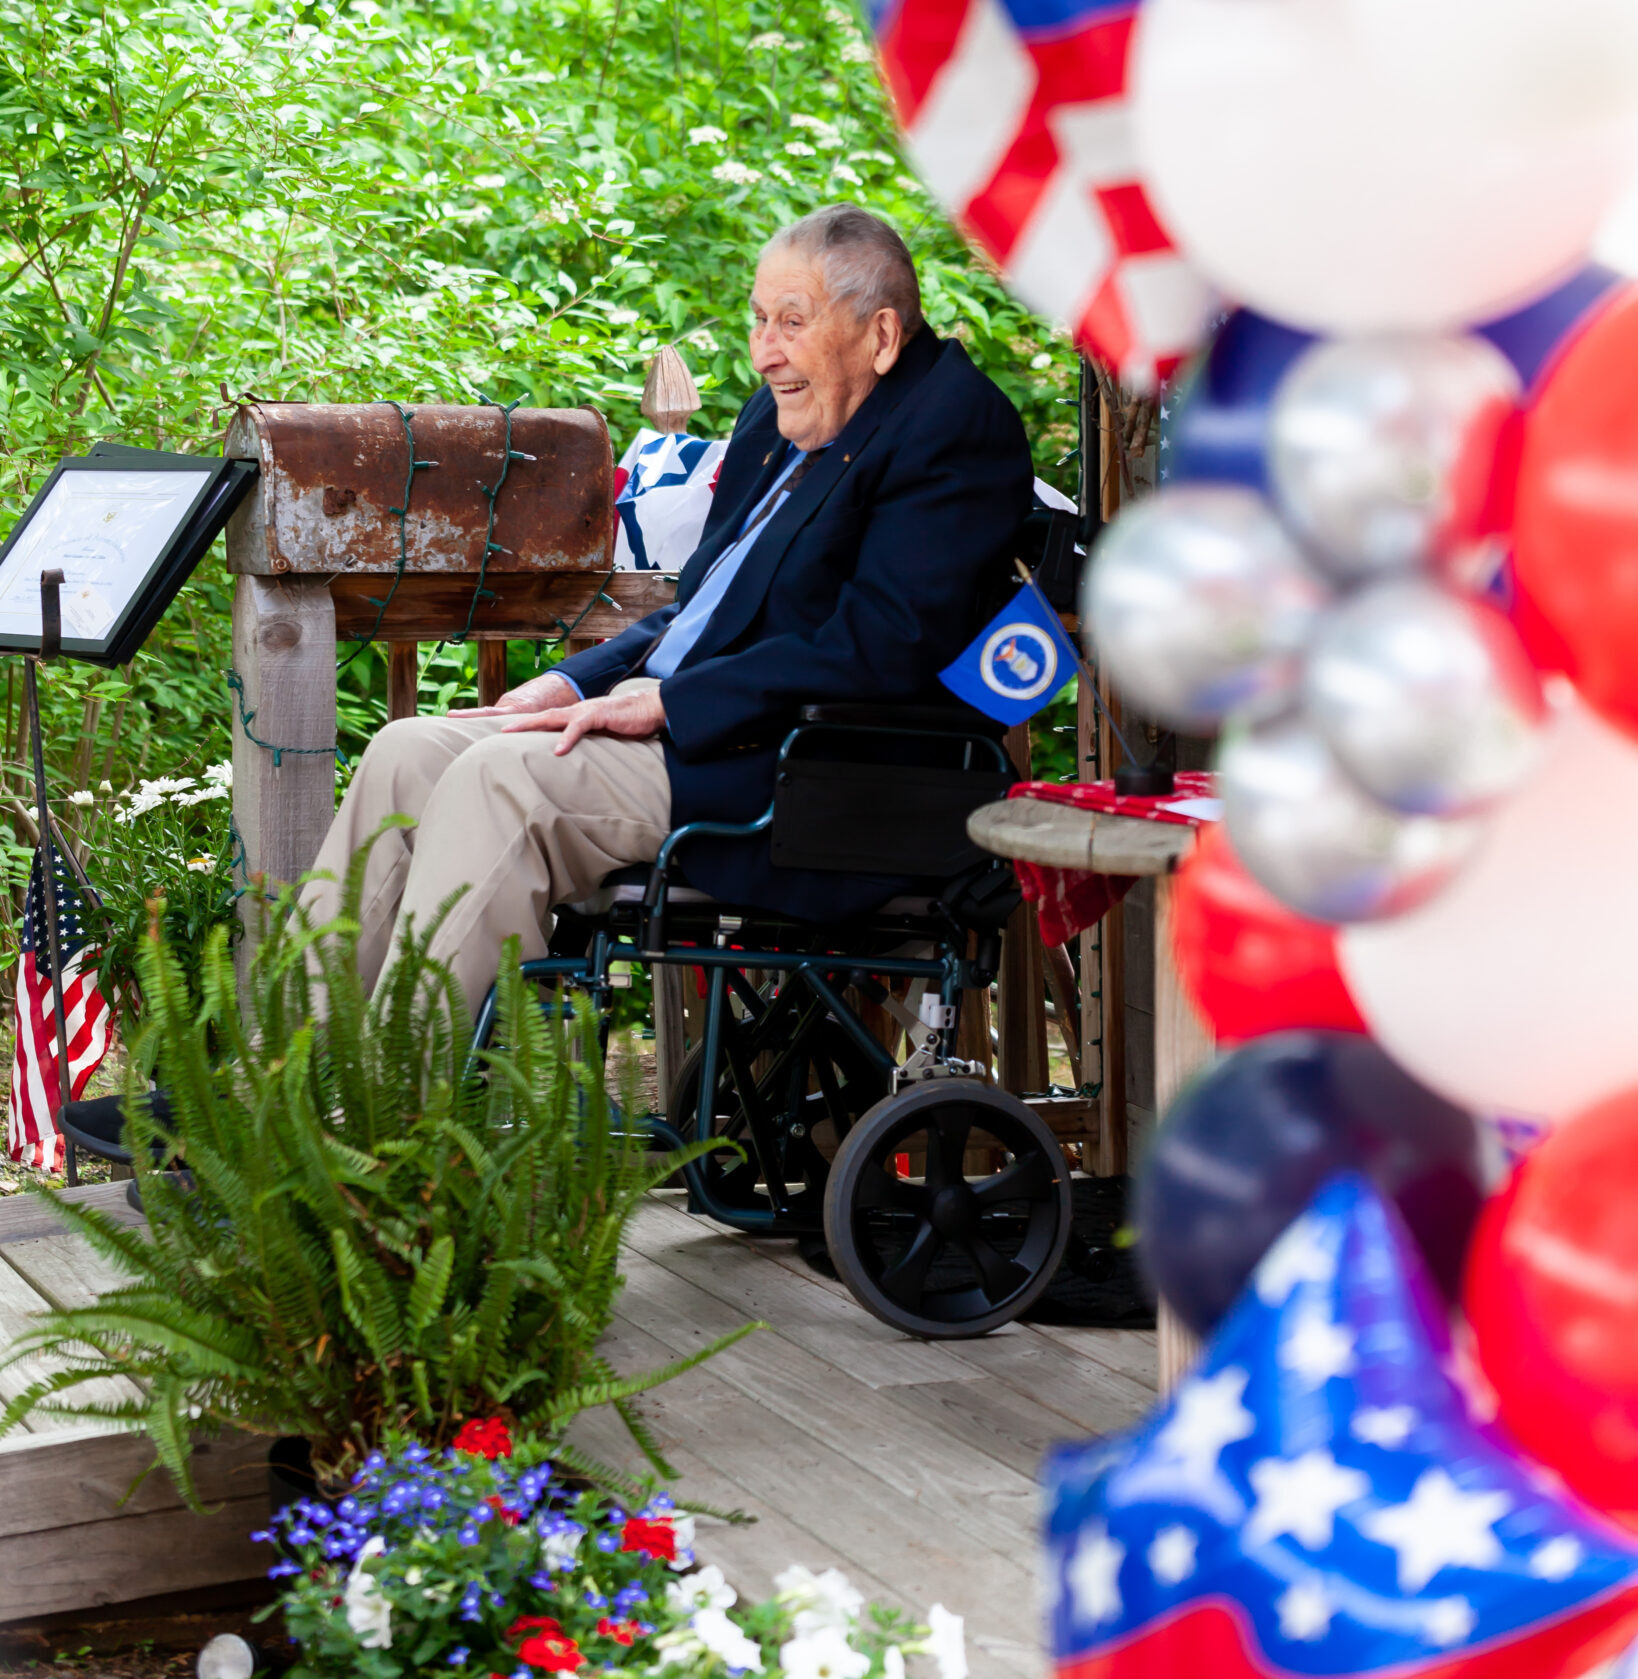 Veteran in navy suit jacket sits in a wheelchair surrounded by patriotic balloons